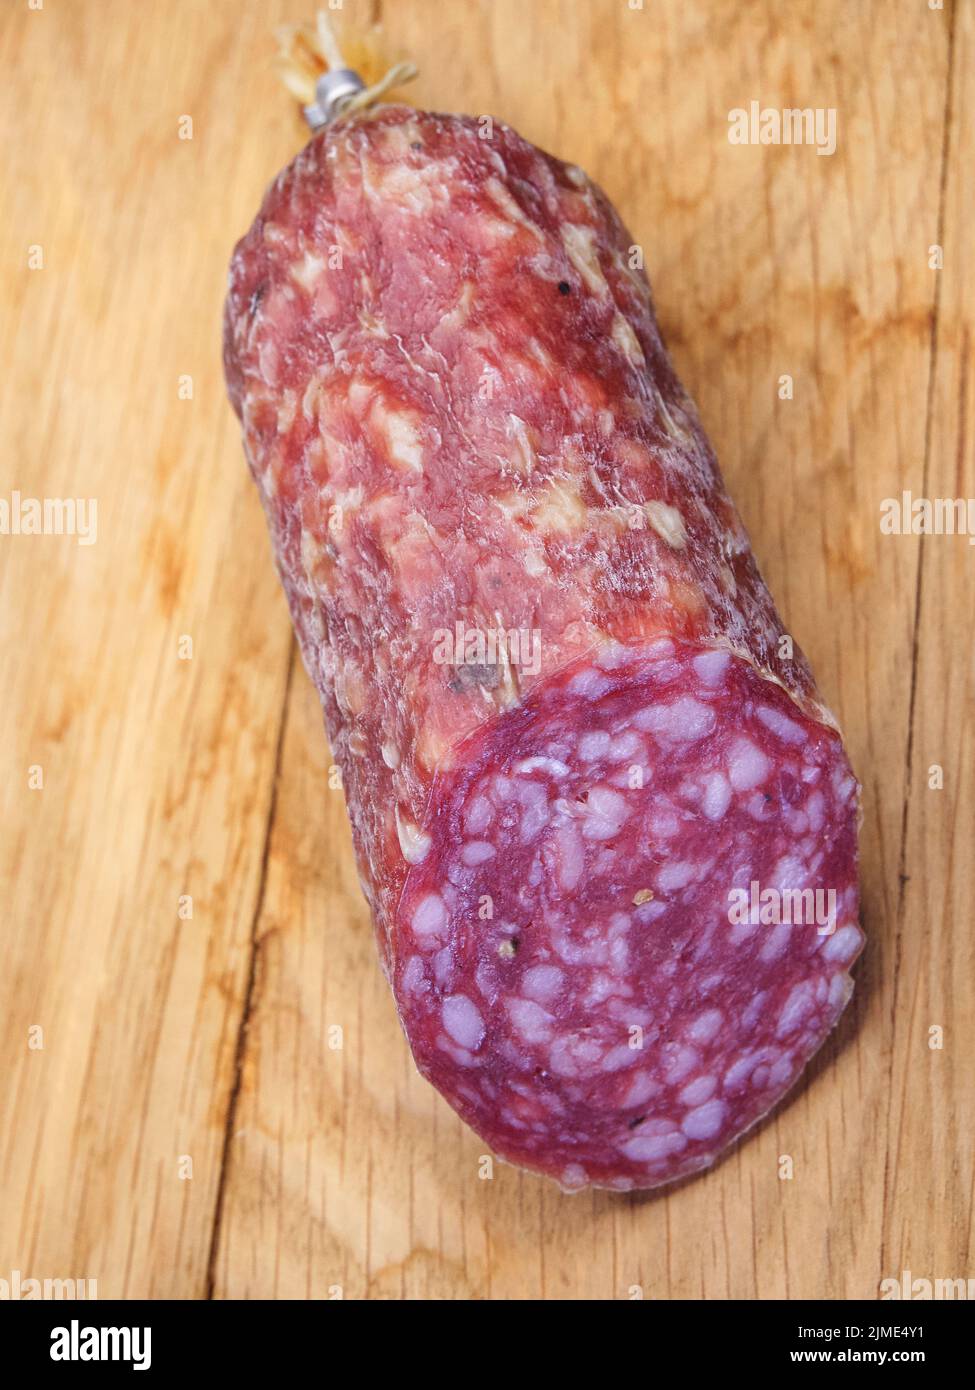 Half a stick of smoked sausage on a wooden surface. A close-up picture. Stock Photo